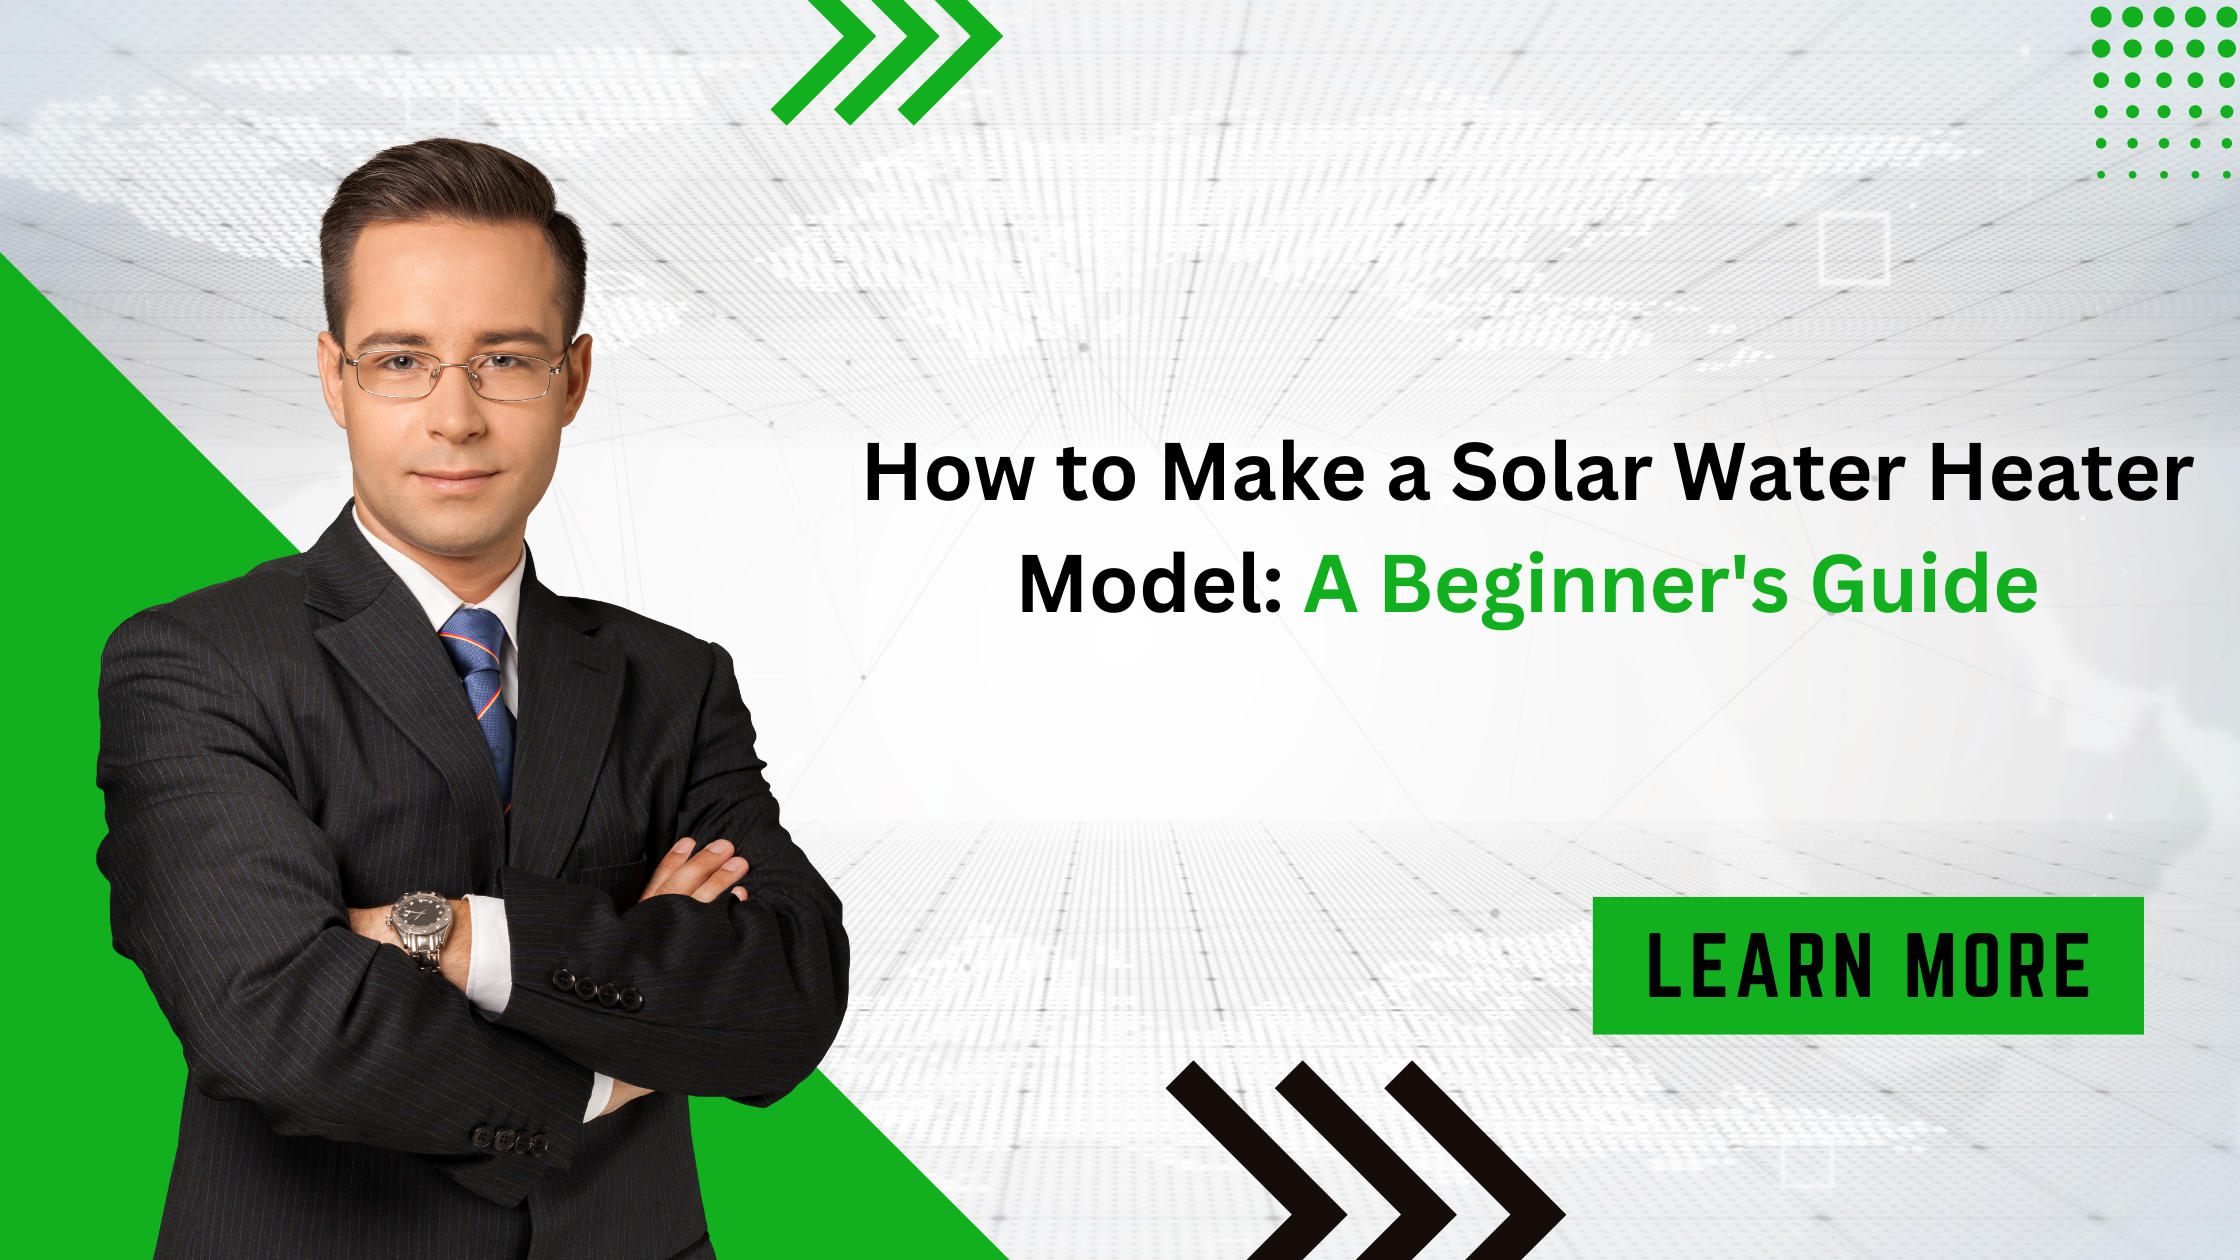 How to Make a Solar Water Heater Model: A Beginner's Guide